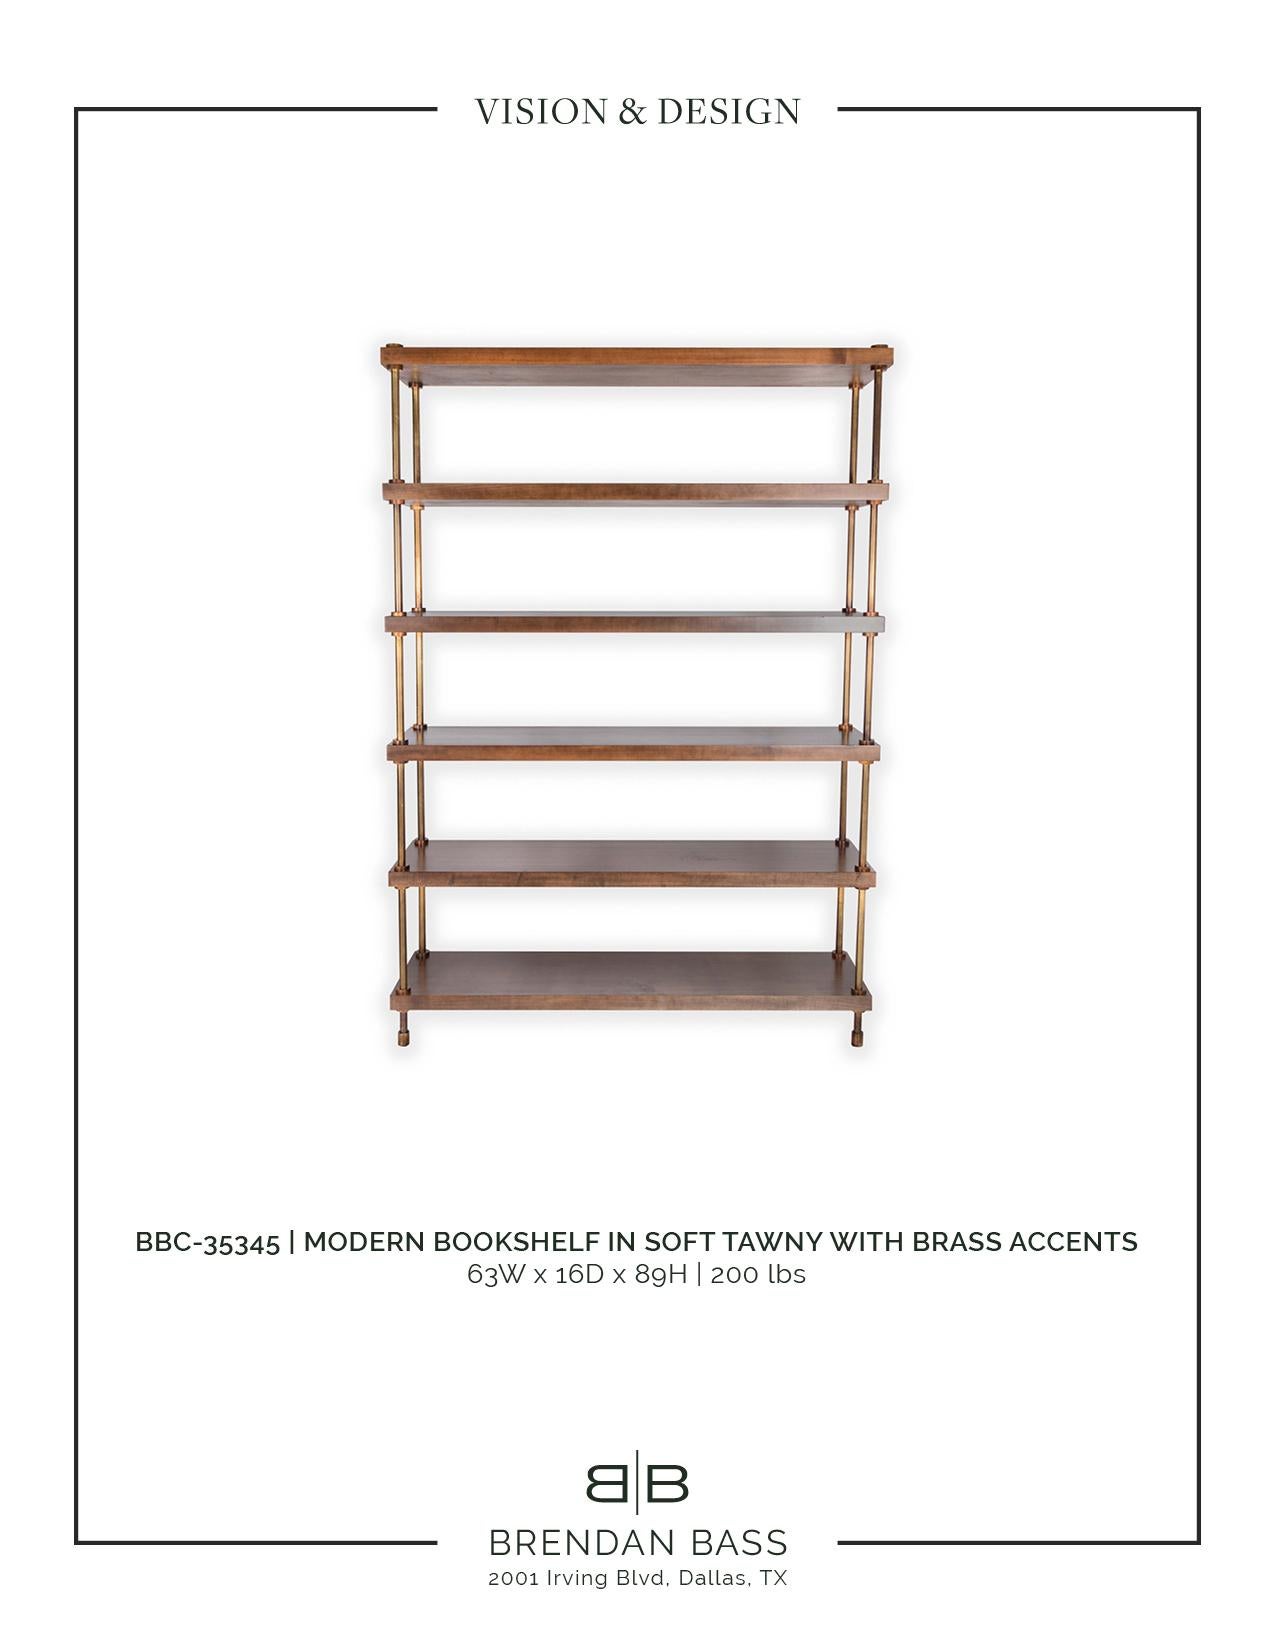 Custom Modern Bookshelf in Soft Tawny Finish with Brass Accents For Sale 1